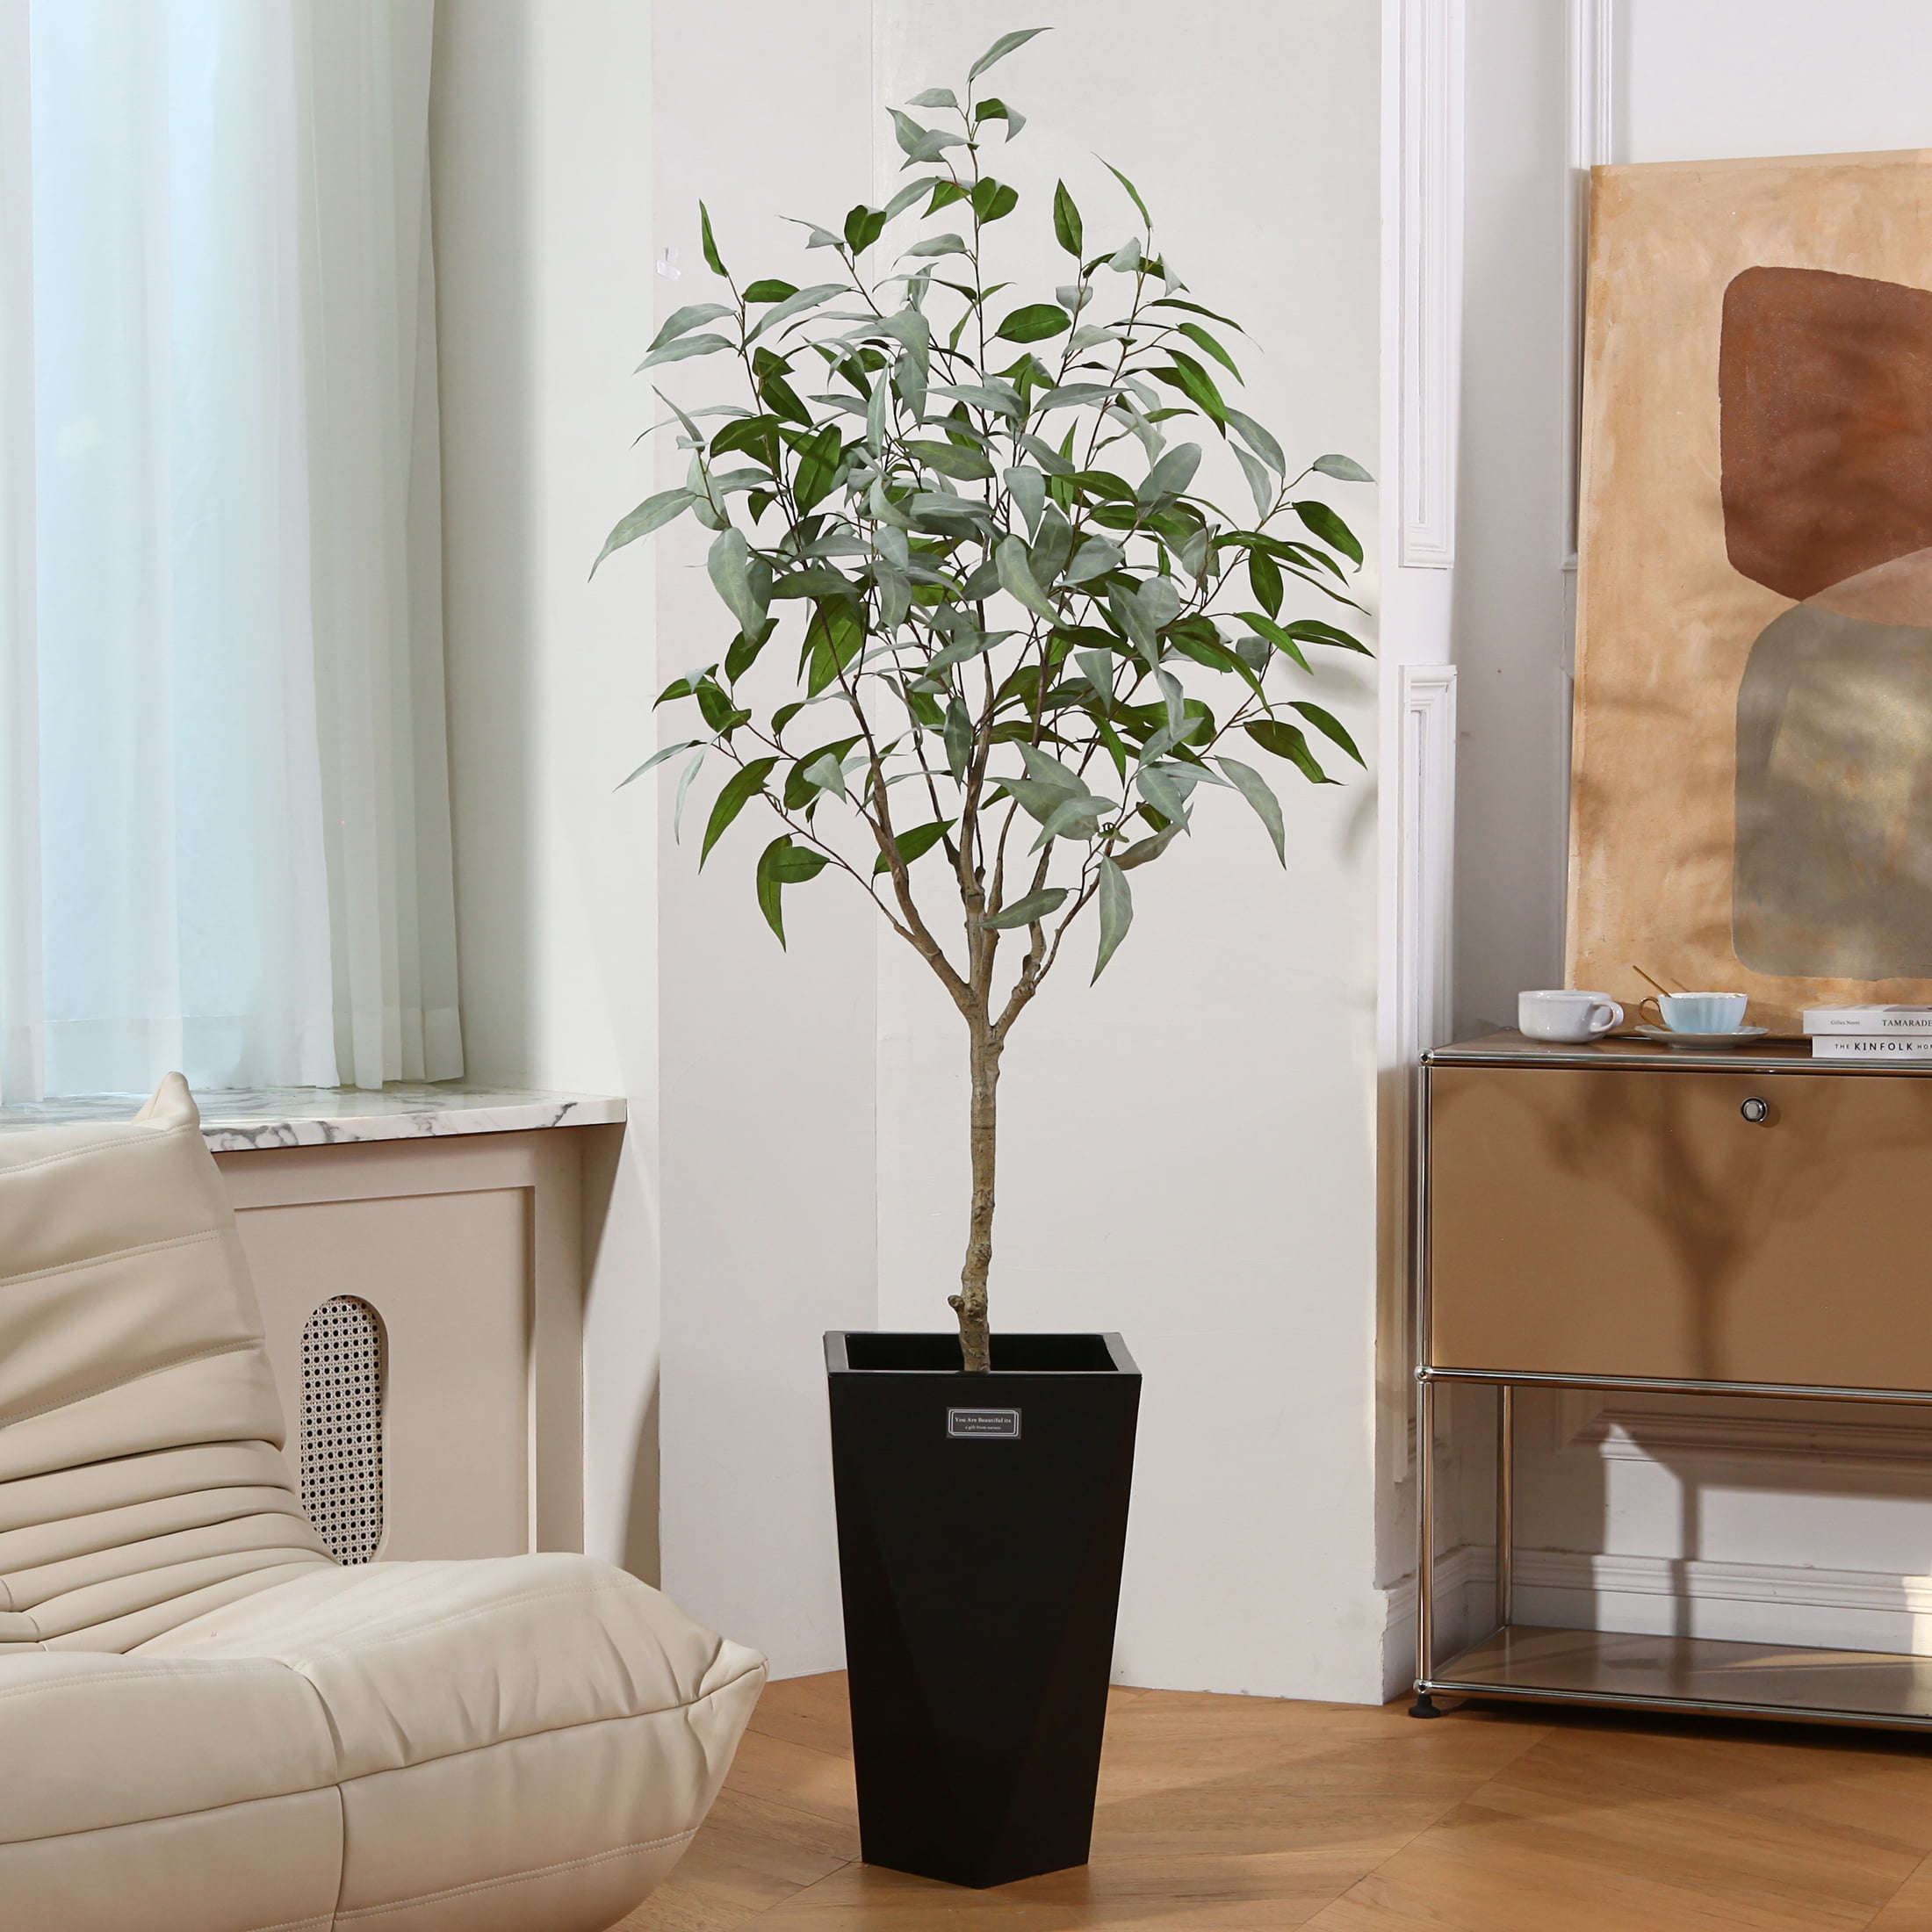 Buy Artificial Plants Online and Get up to 50% Off